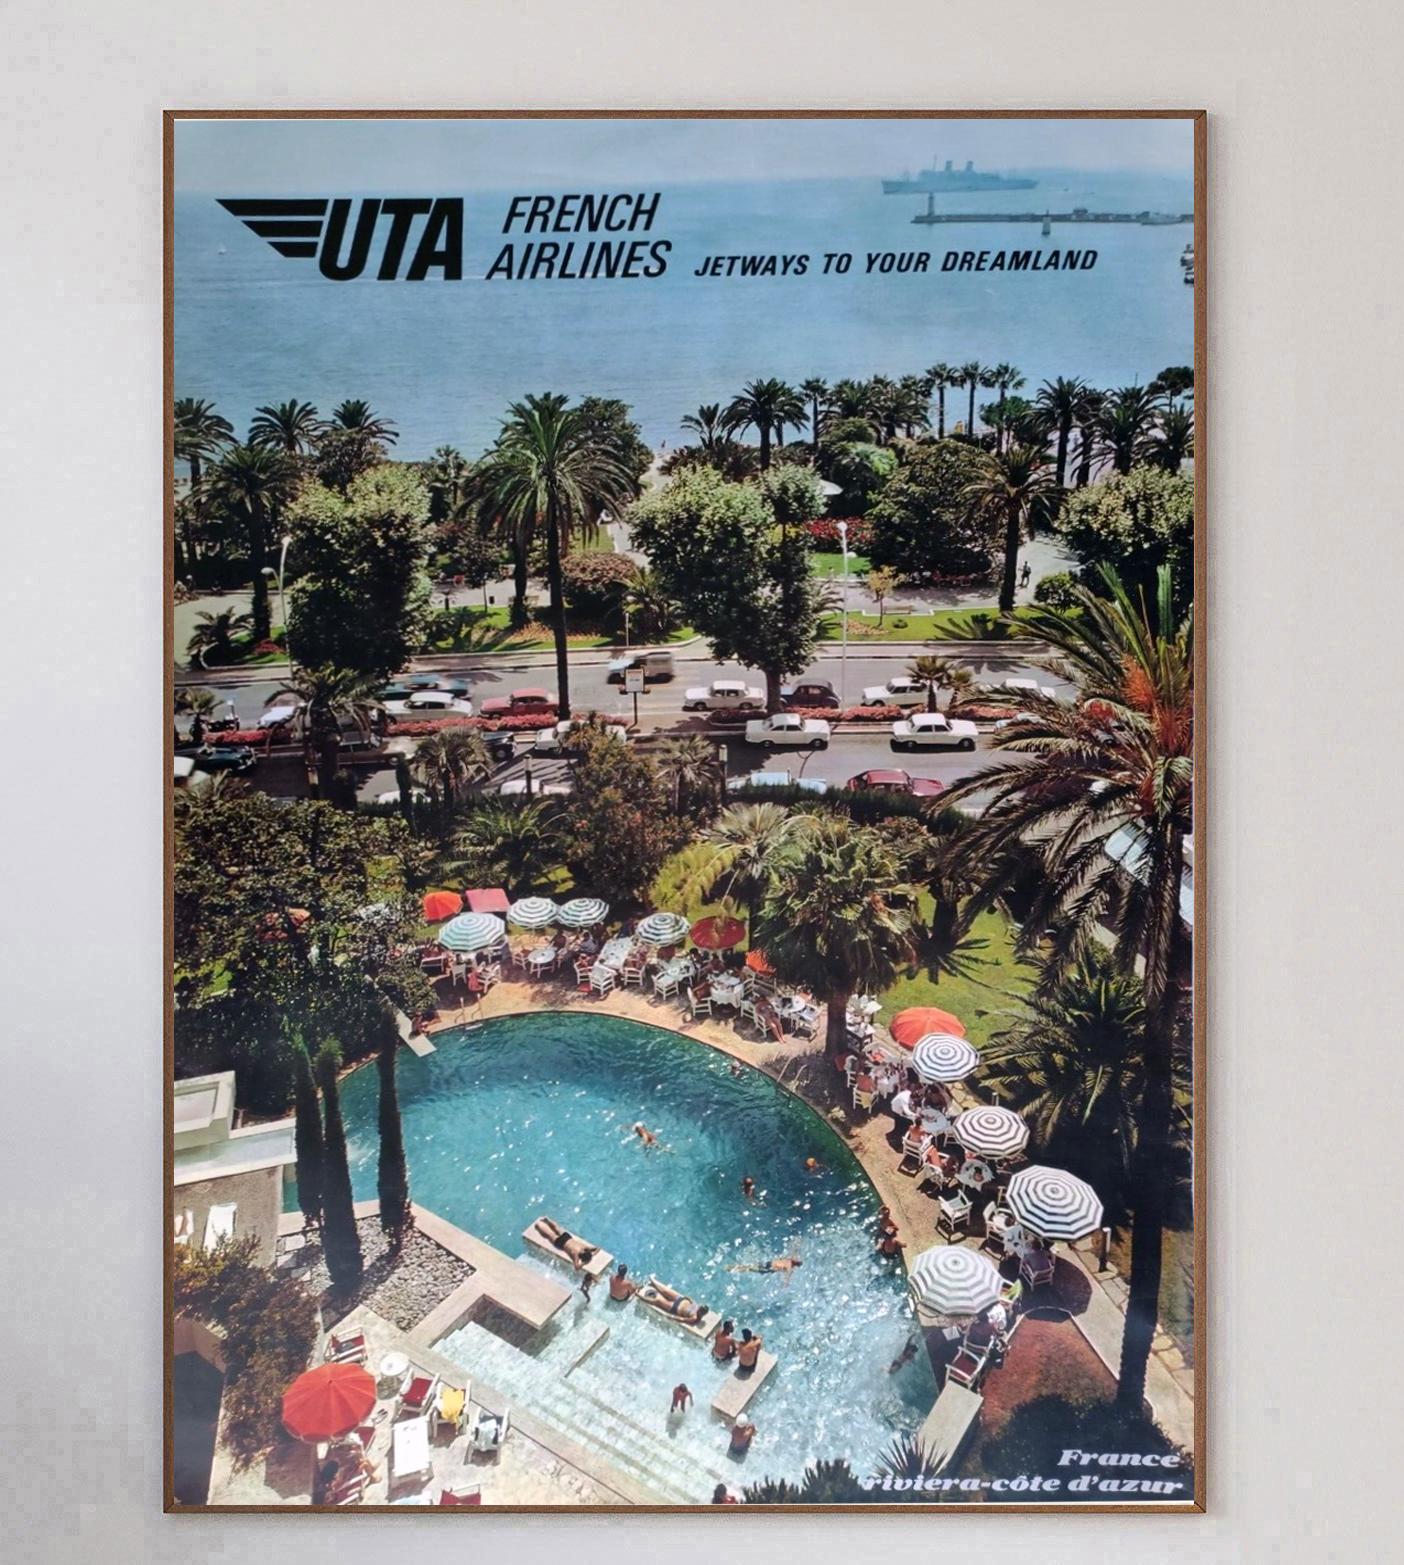 Wonderful poster promoting UTA French Airlines routes to the French Riviera Cote d'Azur. Created in 1967, the piece depicts a beautiful summers day in the Southern France region with a sun bed lined swimming pool by the beautiful coast and reads